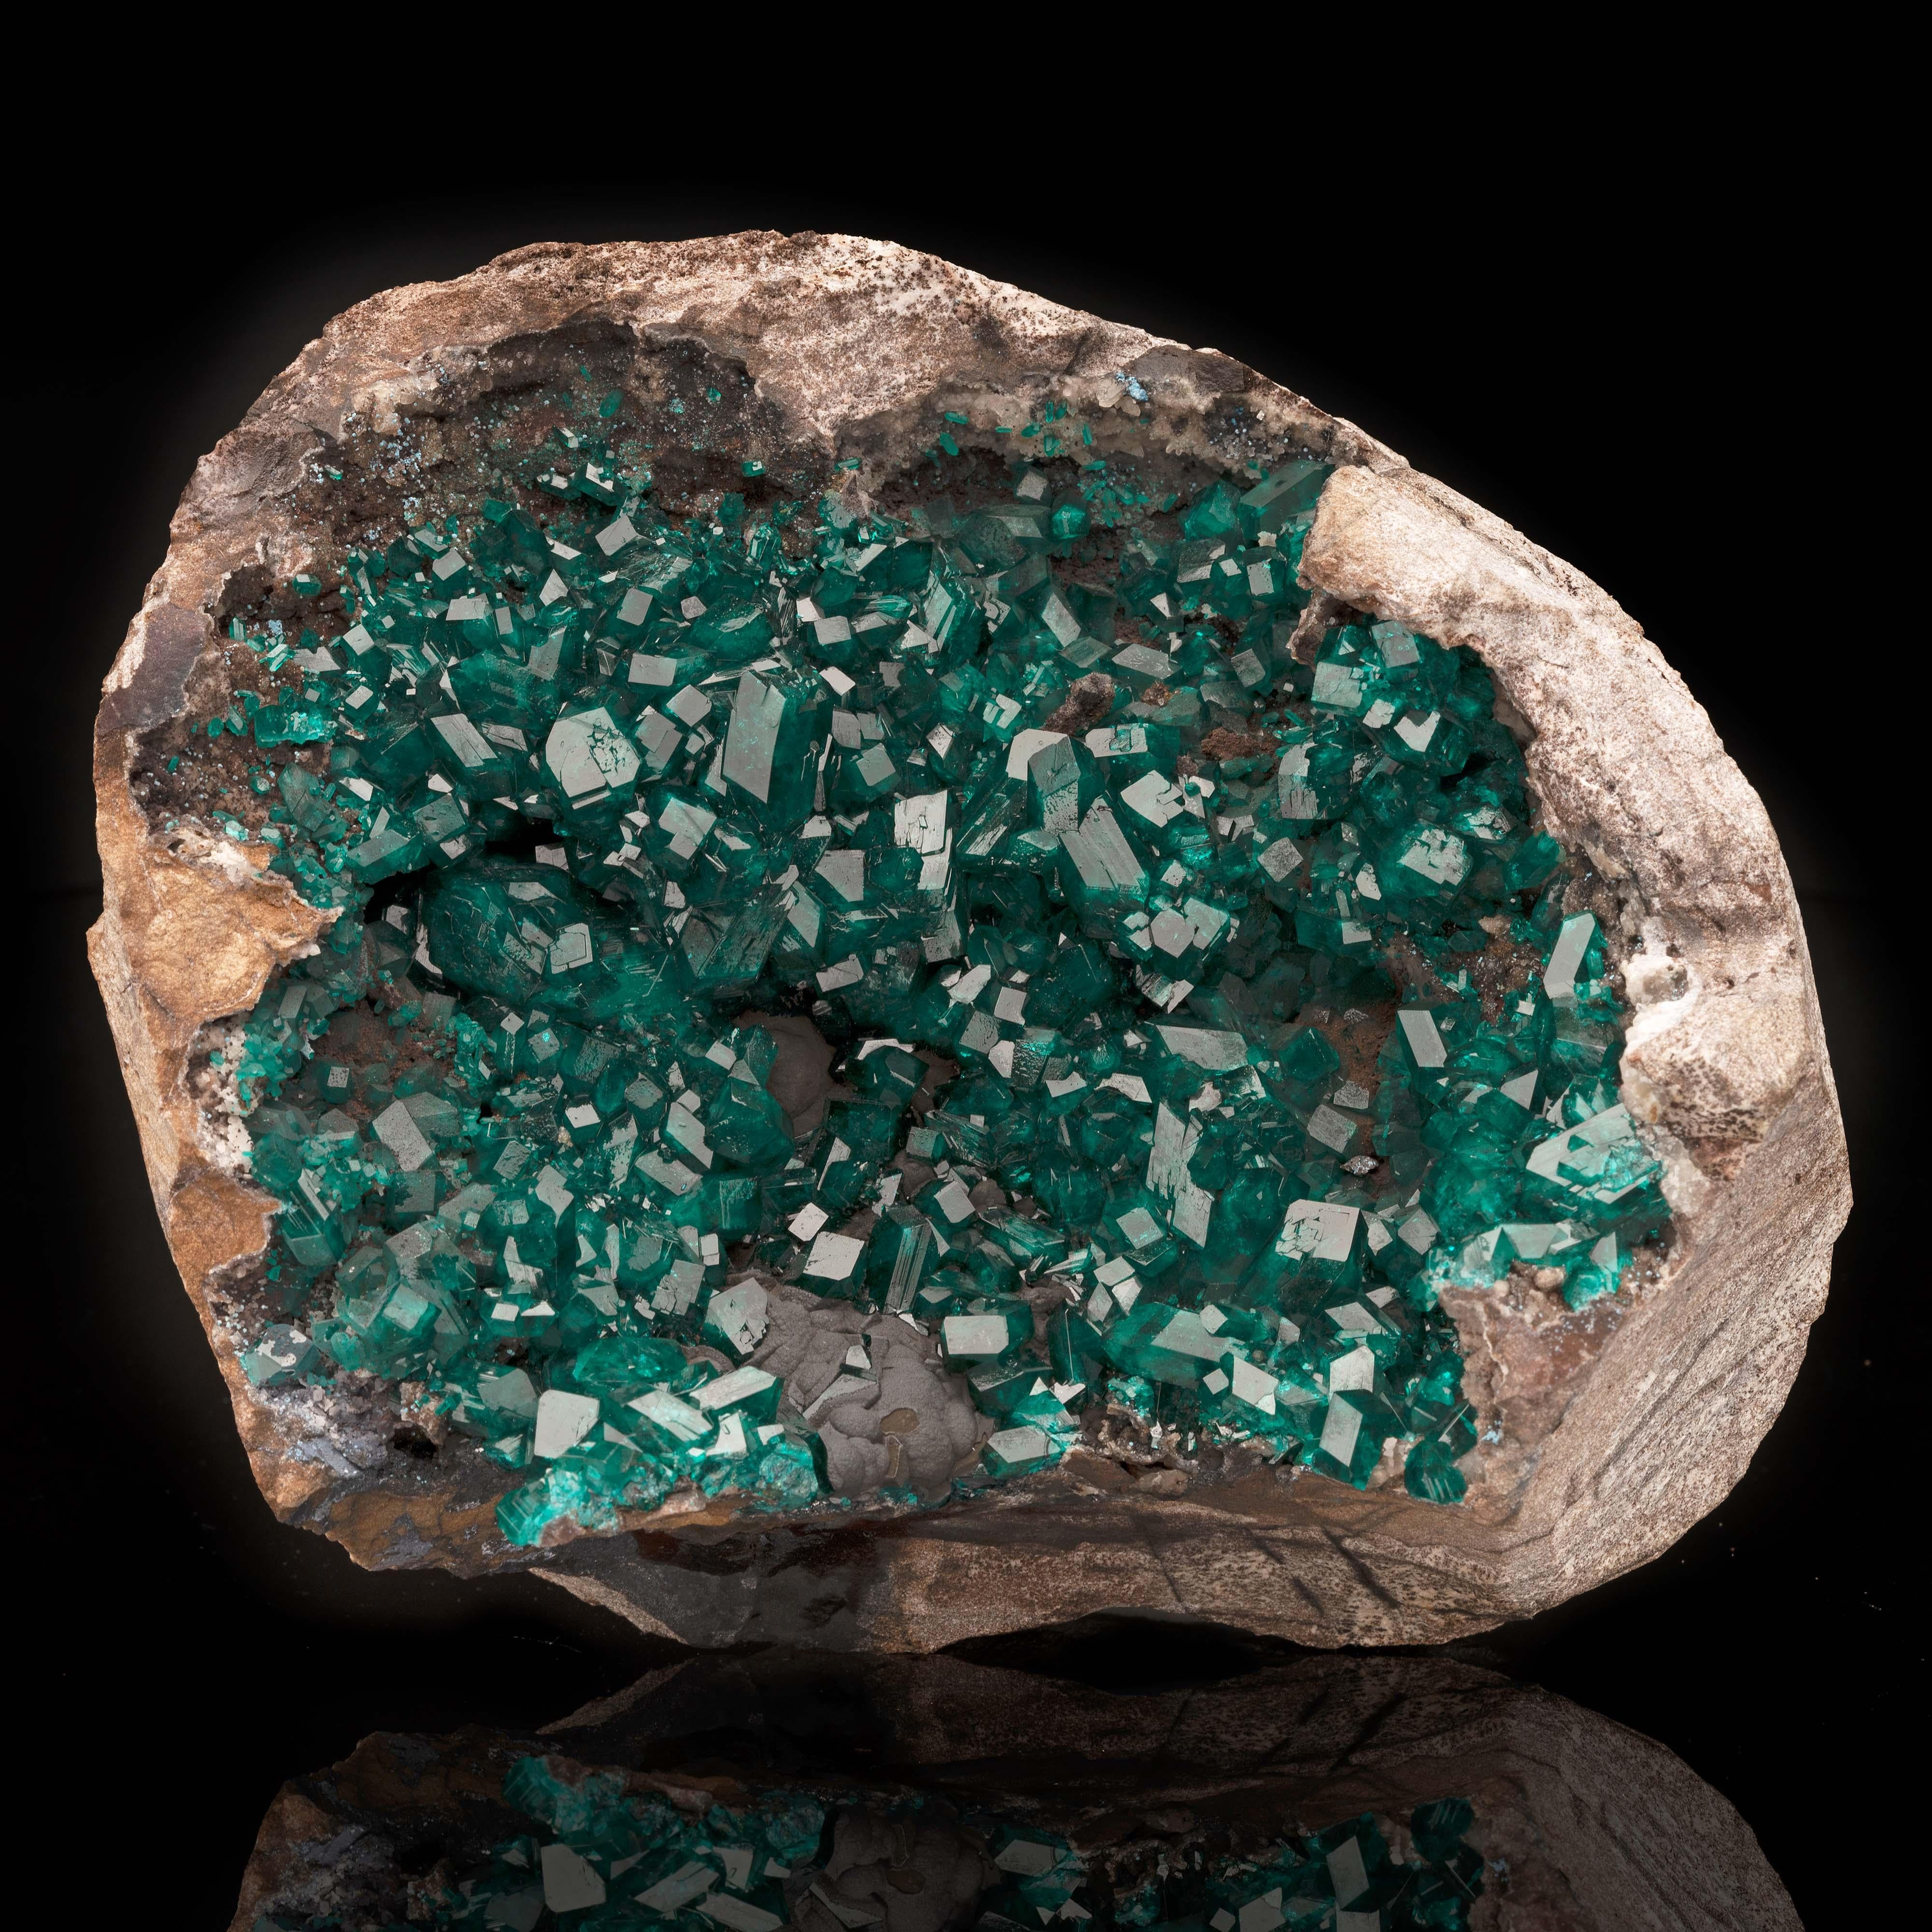 From the DRC – one of only two locations worldwide where this rare and coveted emerald green to blue-green crystal can be found, the other being Namibia – this vug – a natural hole where crystals form – is stuffed full of deeply pigmented,